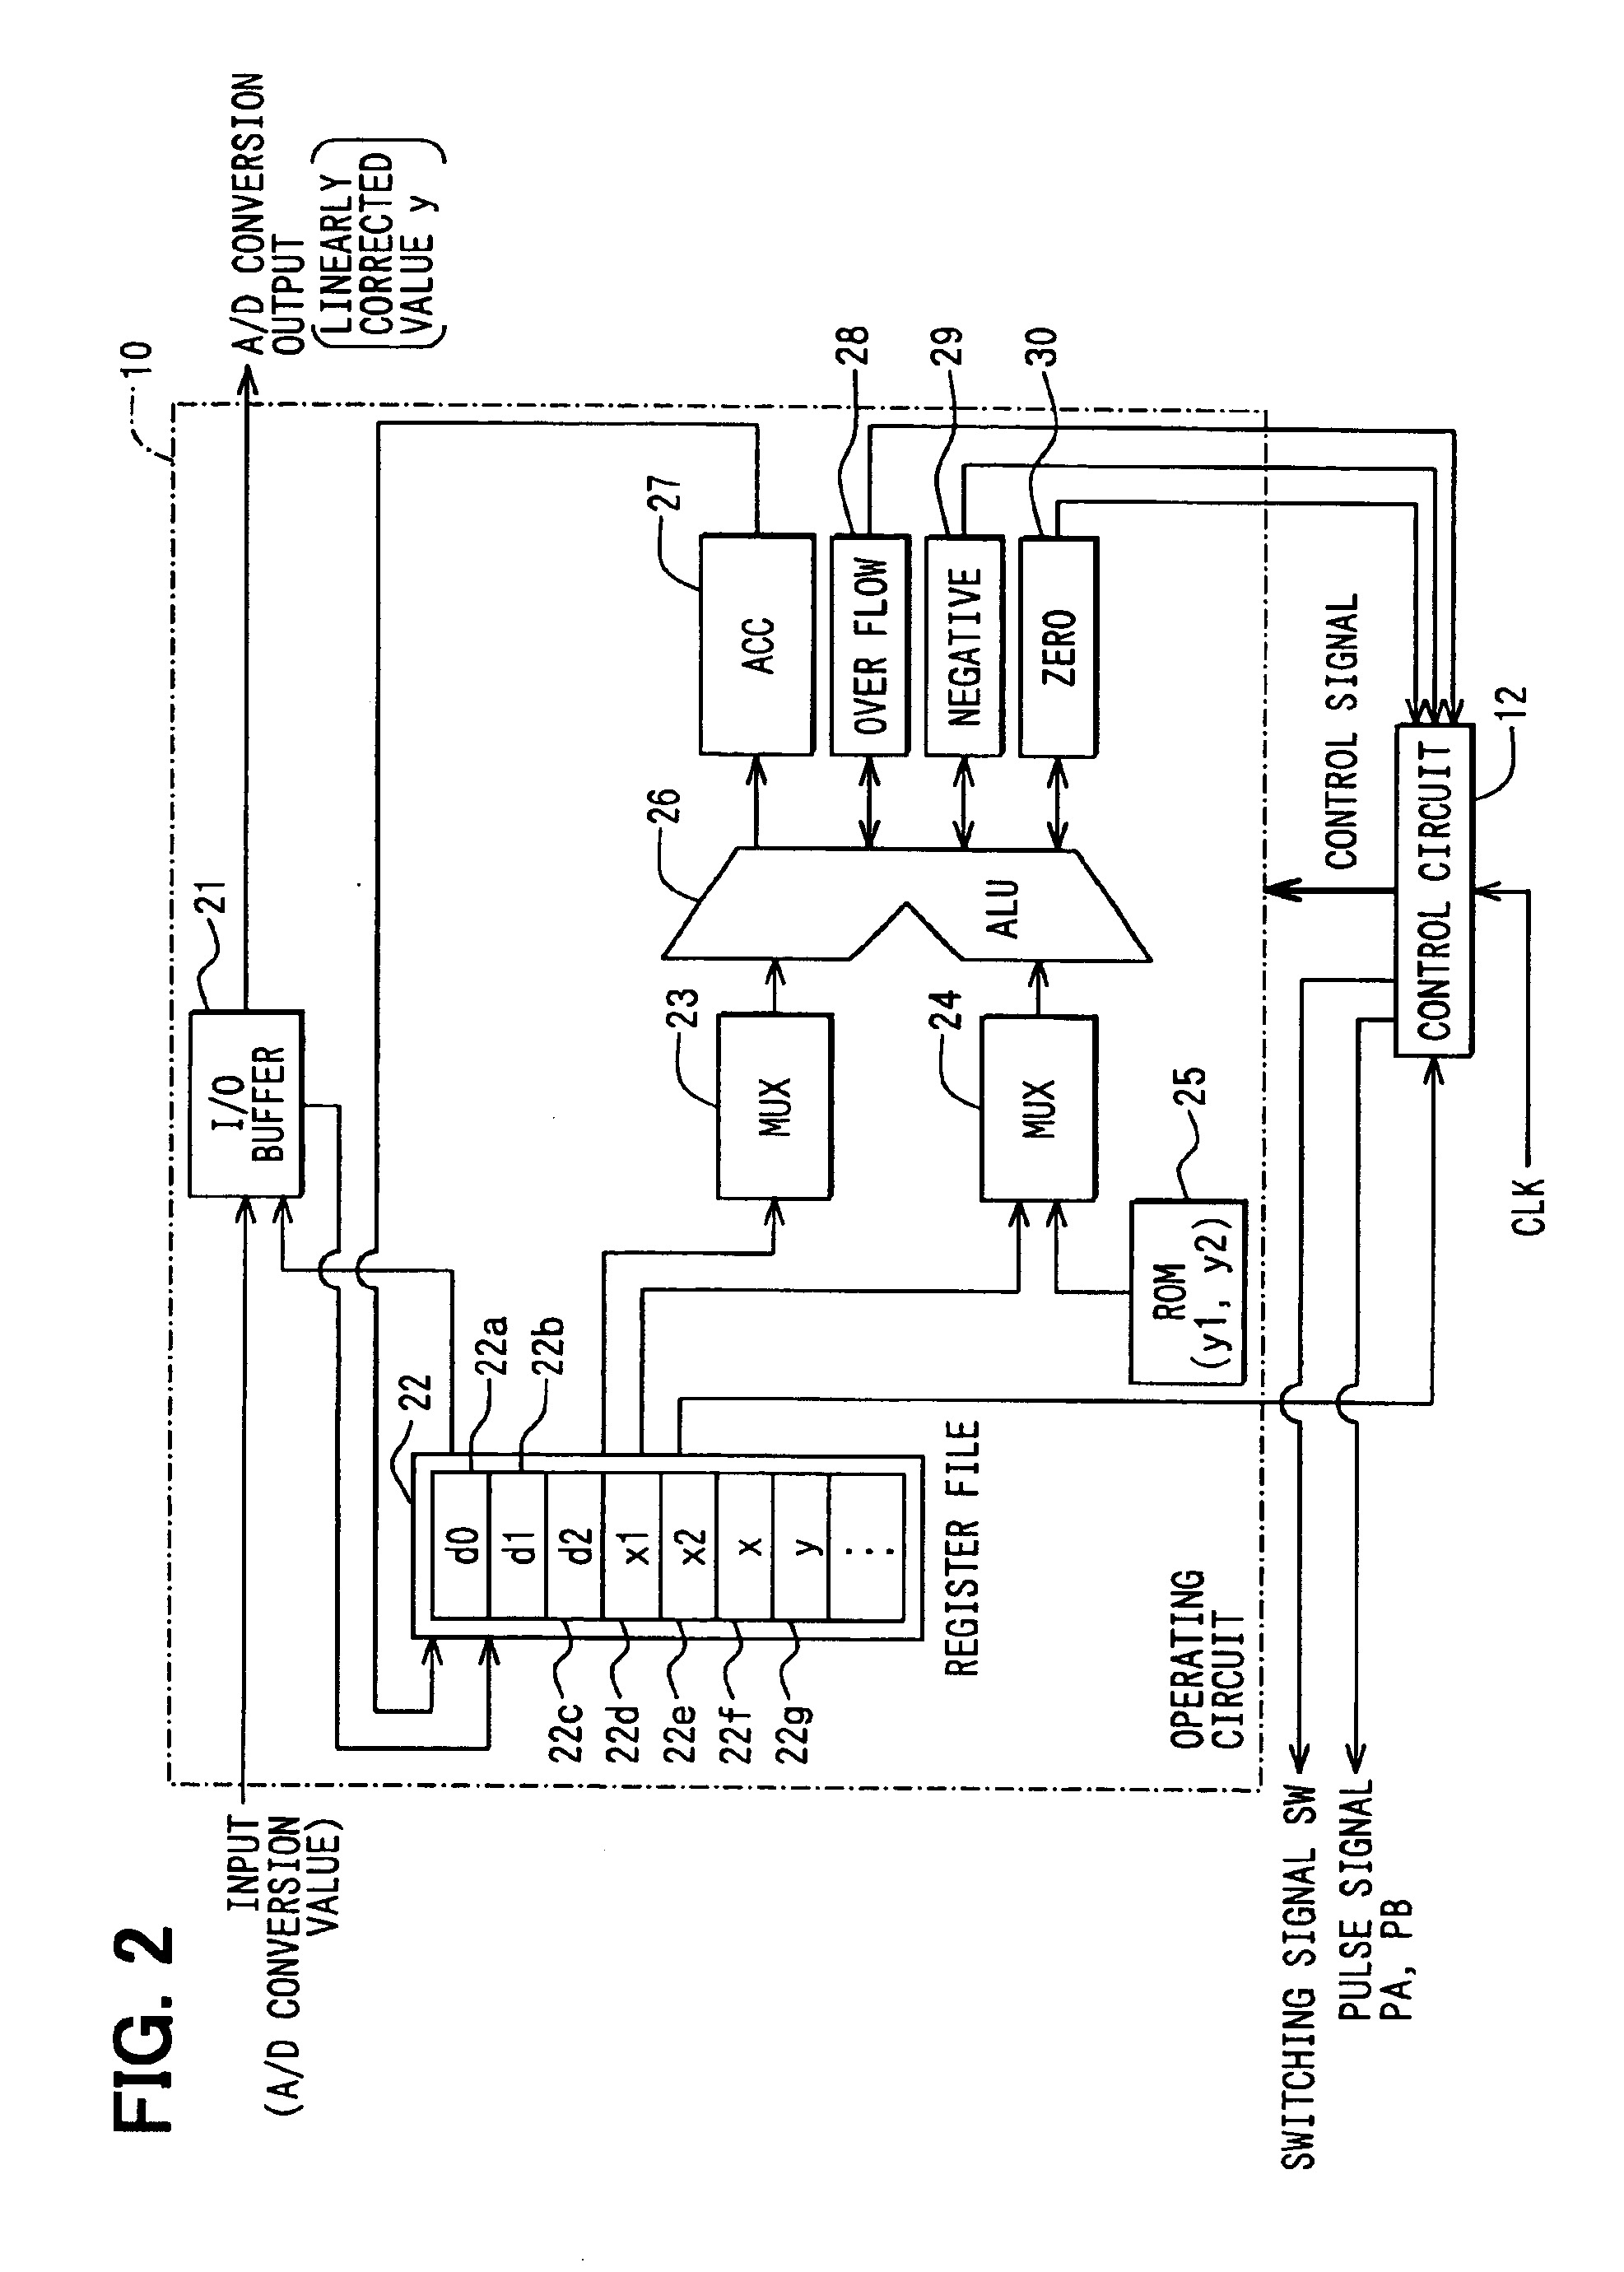 Non-linearity correcting method and device for A/D conversion output data